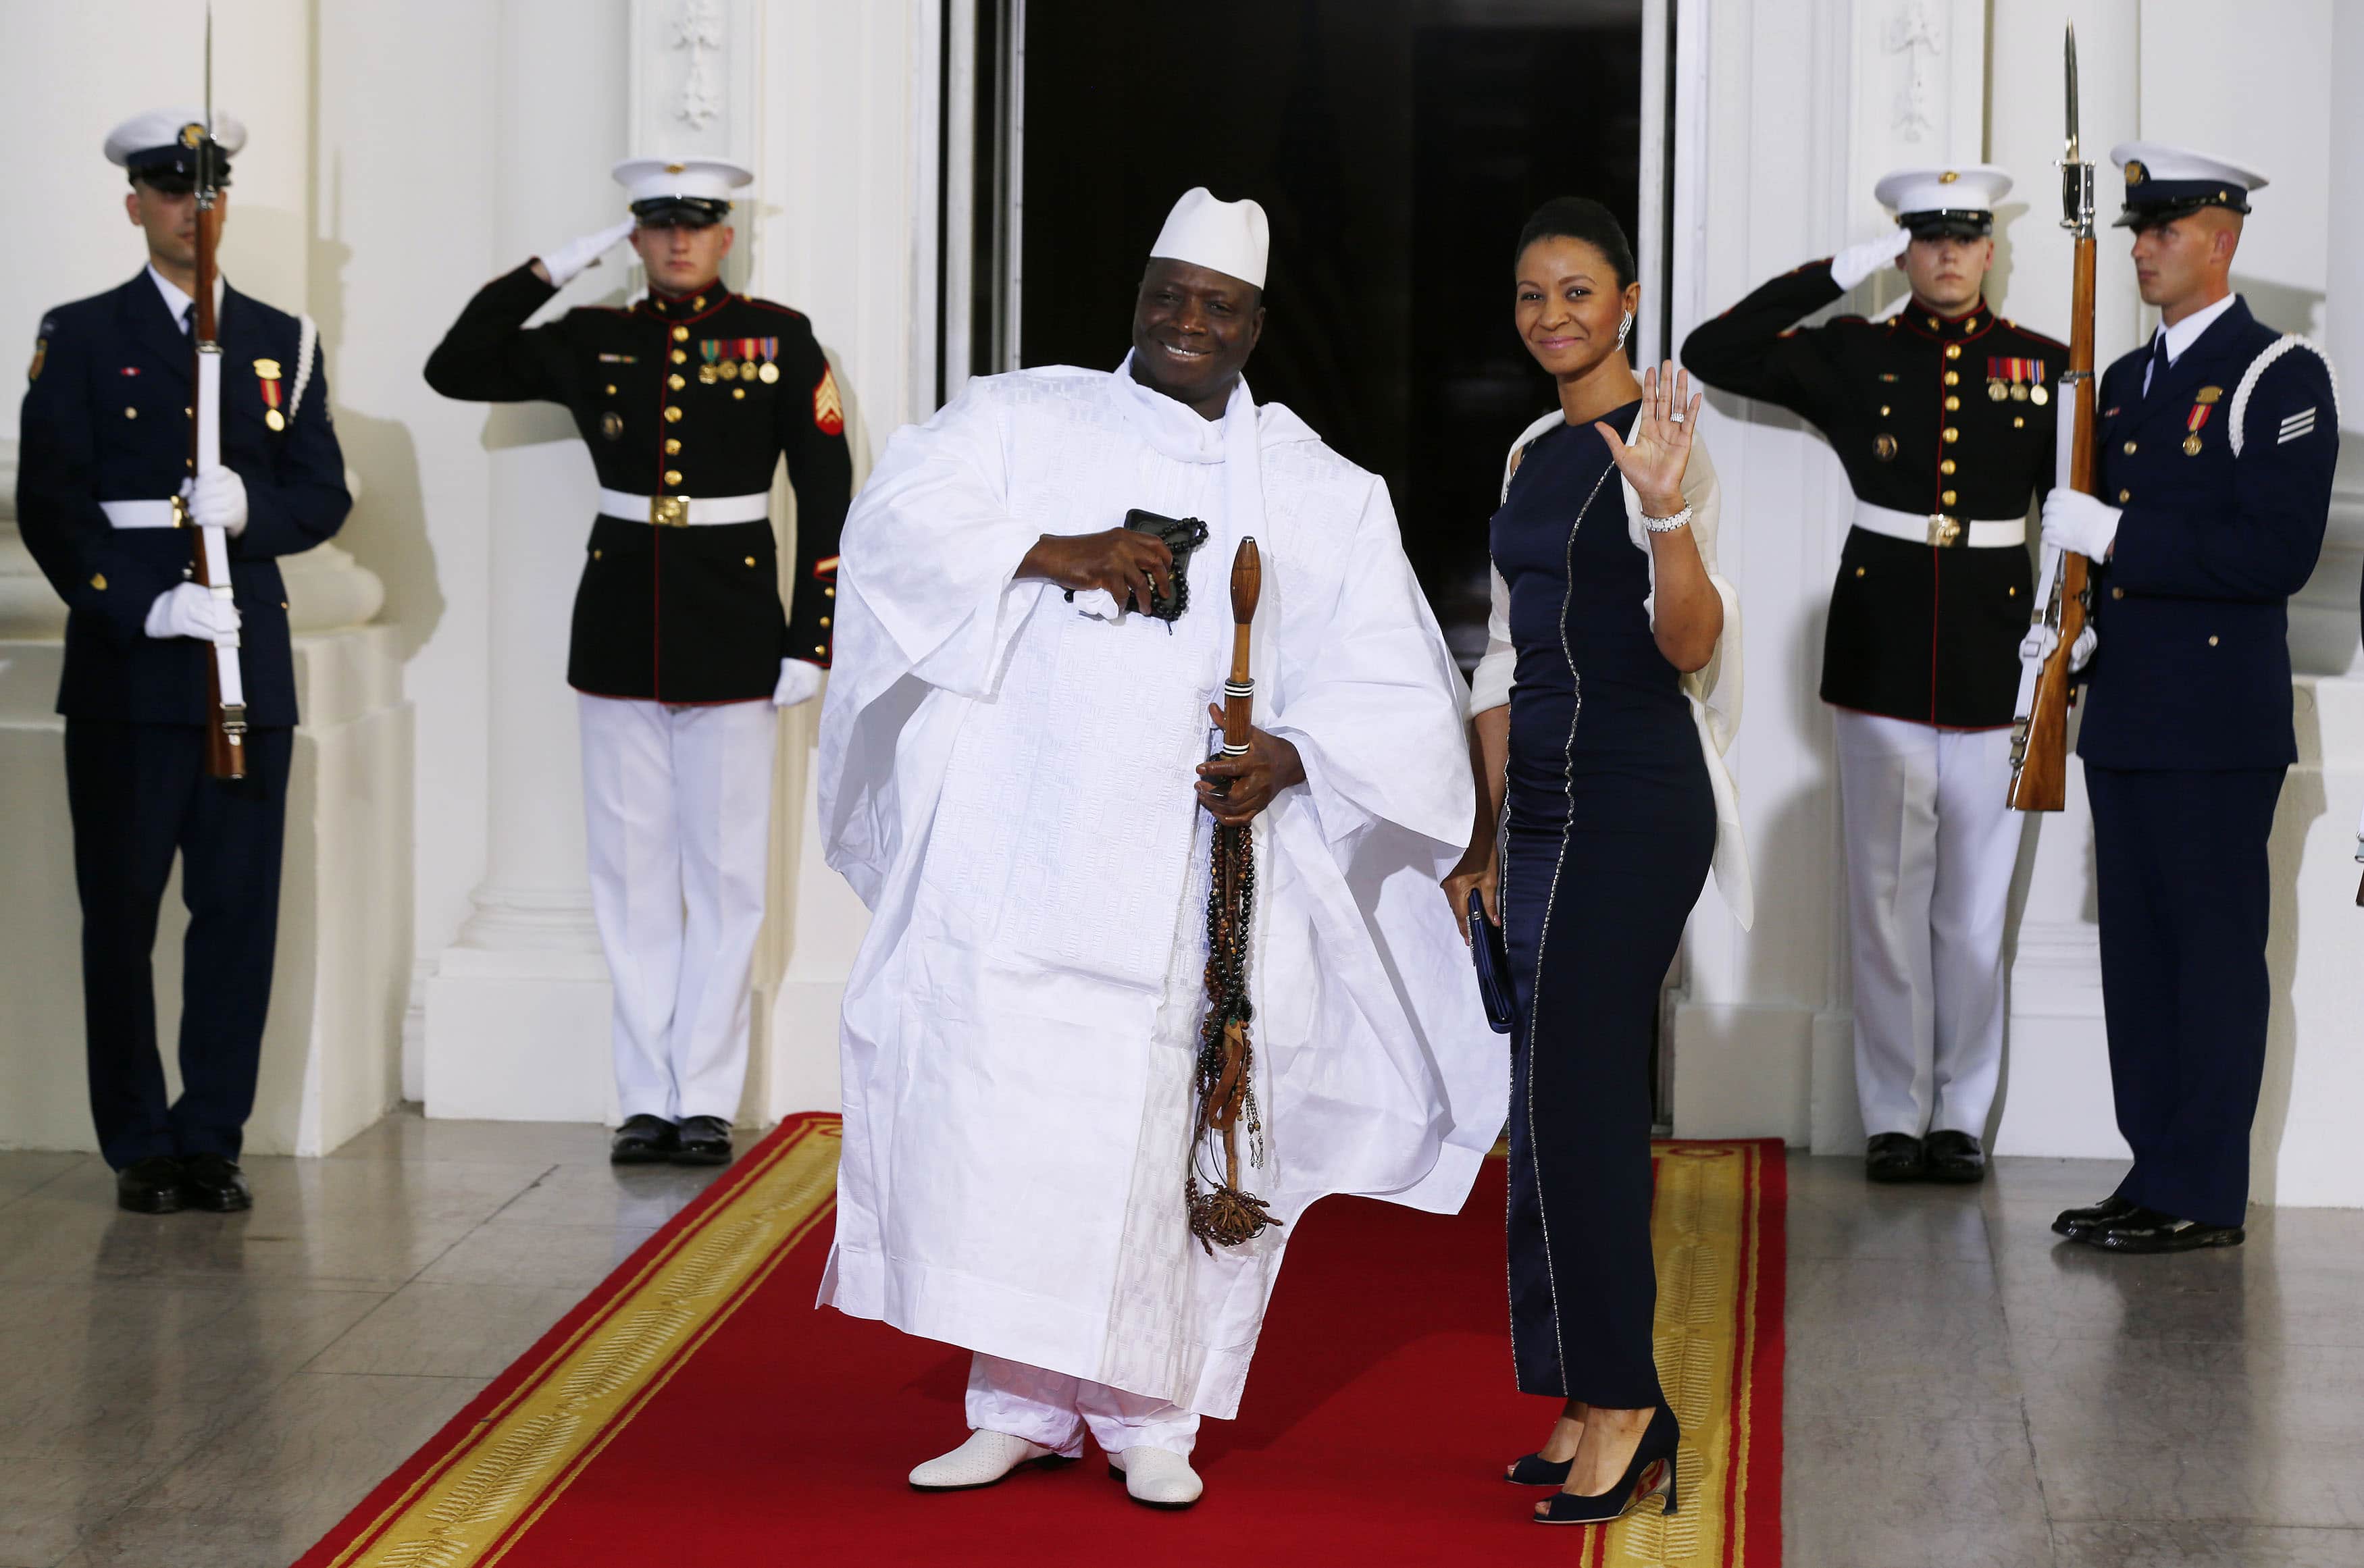 Republic of the Gambia's President Yahya Jammeh and his wife, Zineb Jammeh, arrive for the official U.S.-Africa Leaders Summit dinner hosted by U.S. President Barack Obama at the White House in Washington, 5 August 2014, REUTERS/Larry Downing